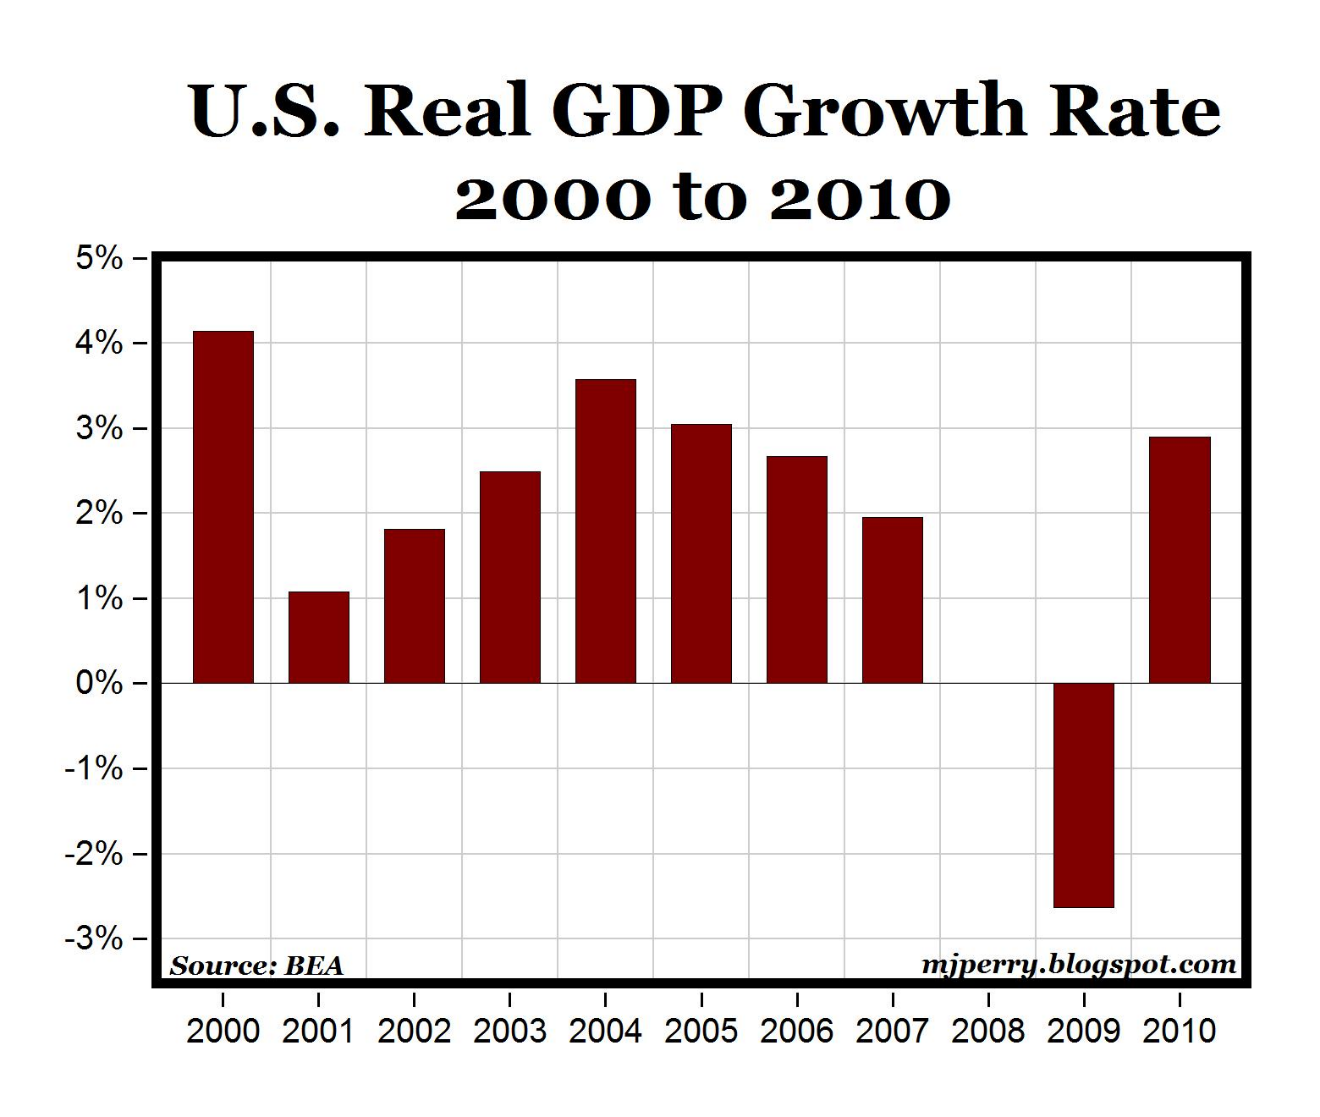 U.S. Real GDP Growth Rate 2000 to 2010